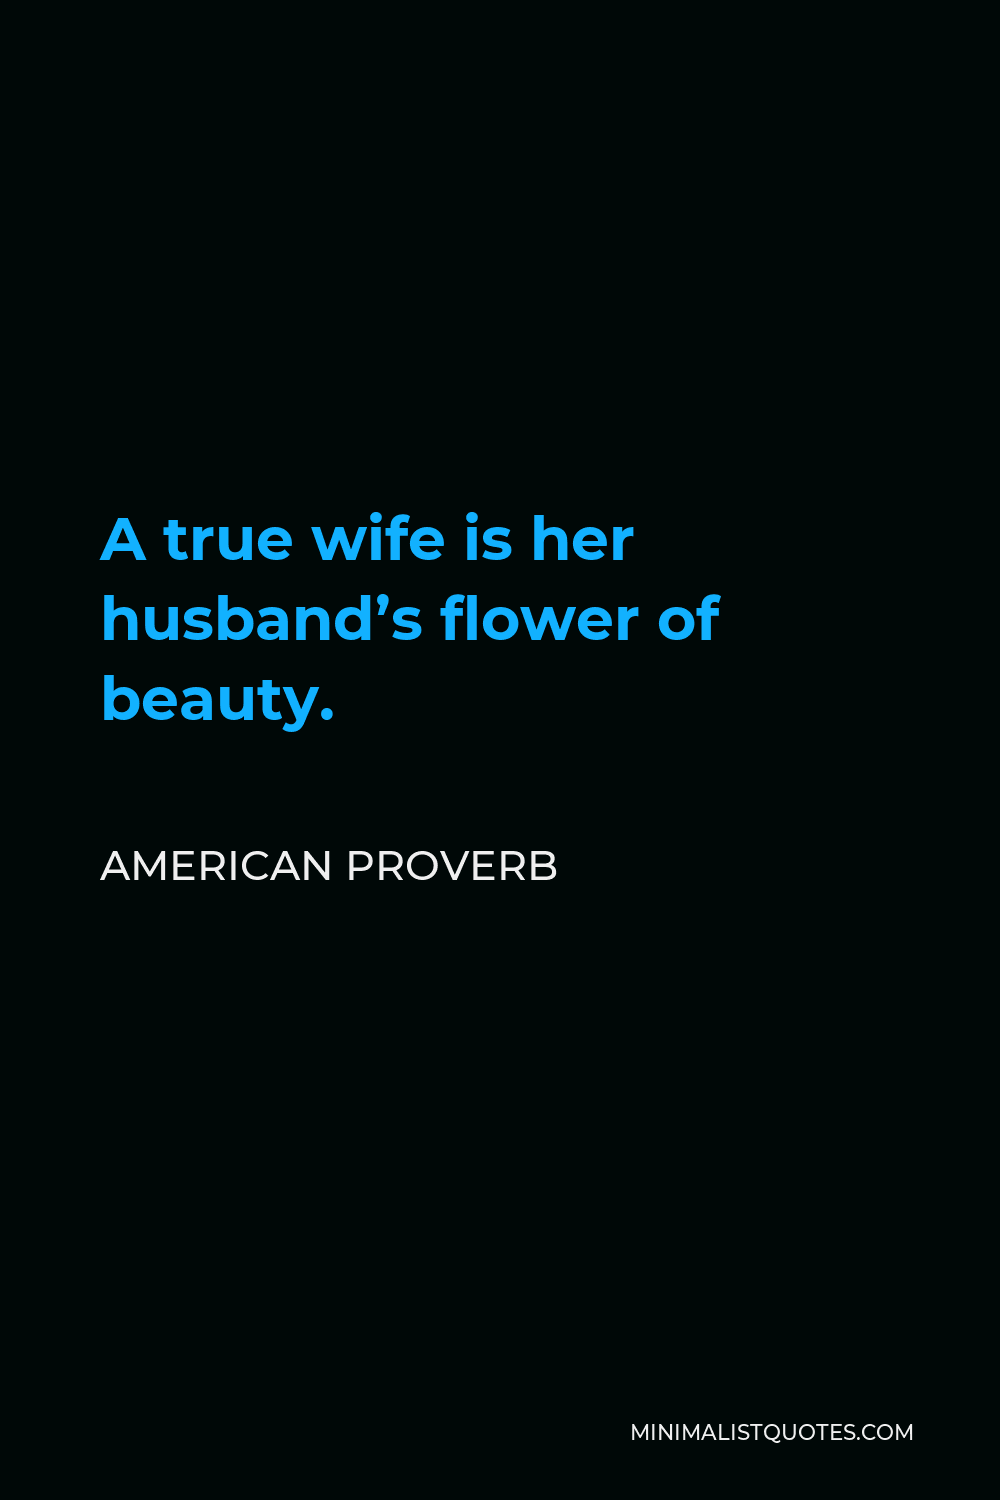 American Proverb Quote - A true wife is her husband’s flower of beauty.